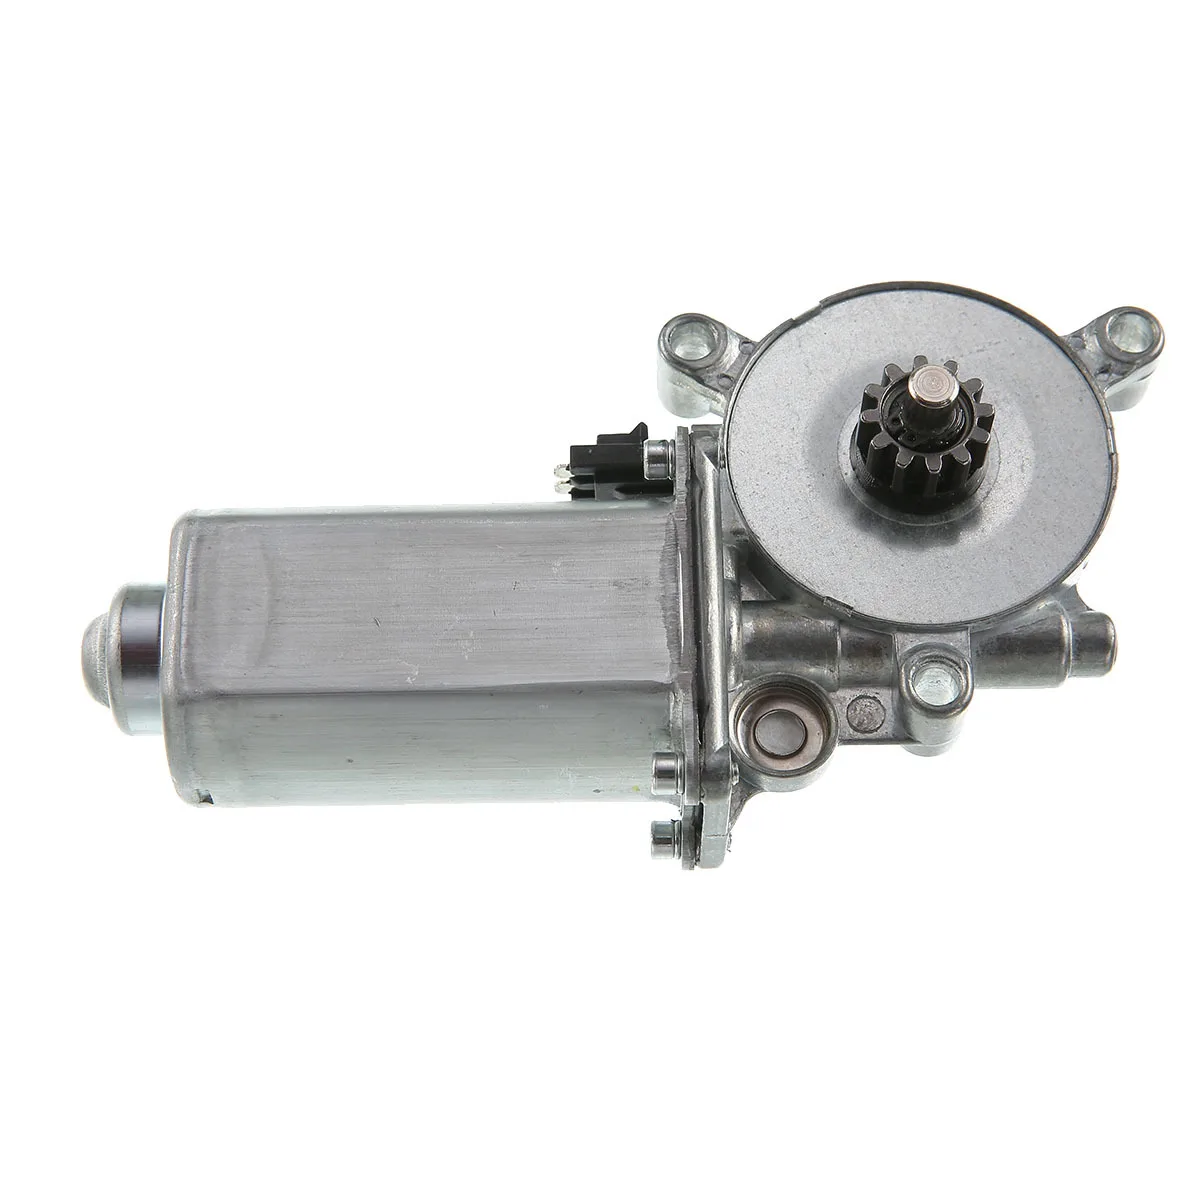 

A3 Repair Shop In-stock CN US CA Window Lift Motor for Buick LeSabre Cadillac DeVille Chevy Pontiac 98 Olds Left 22062568